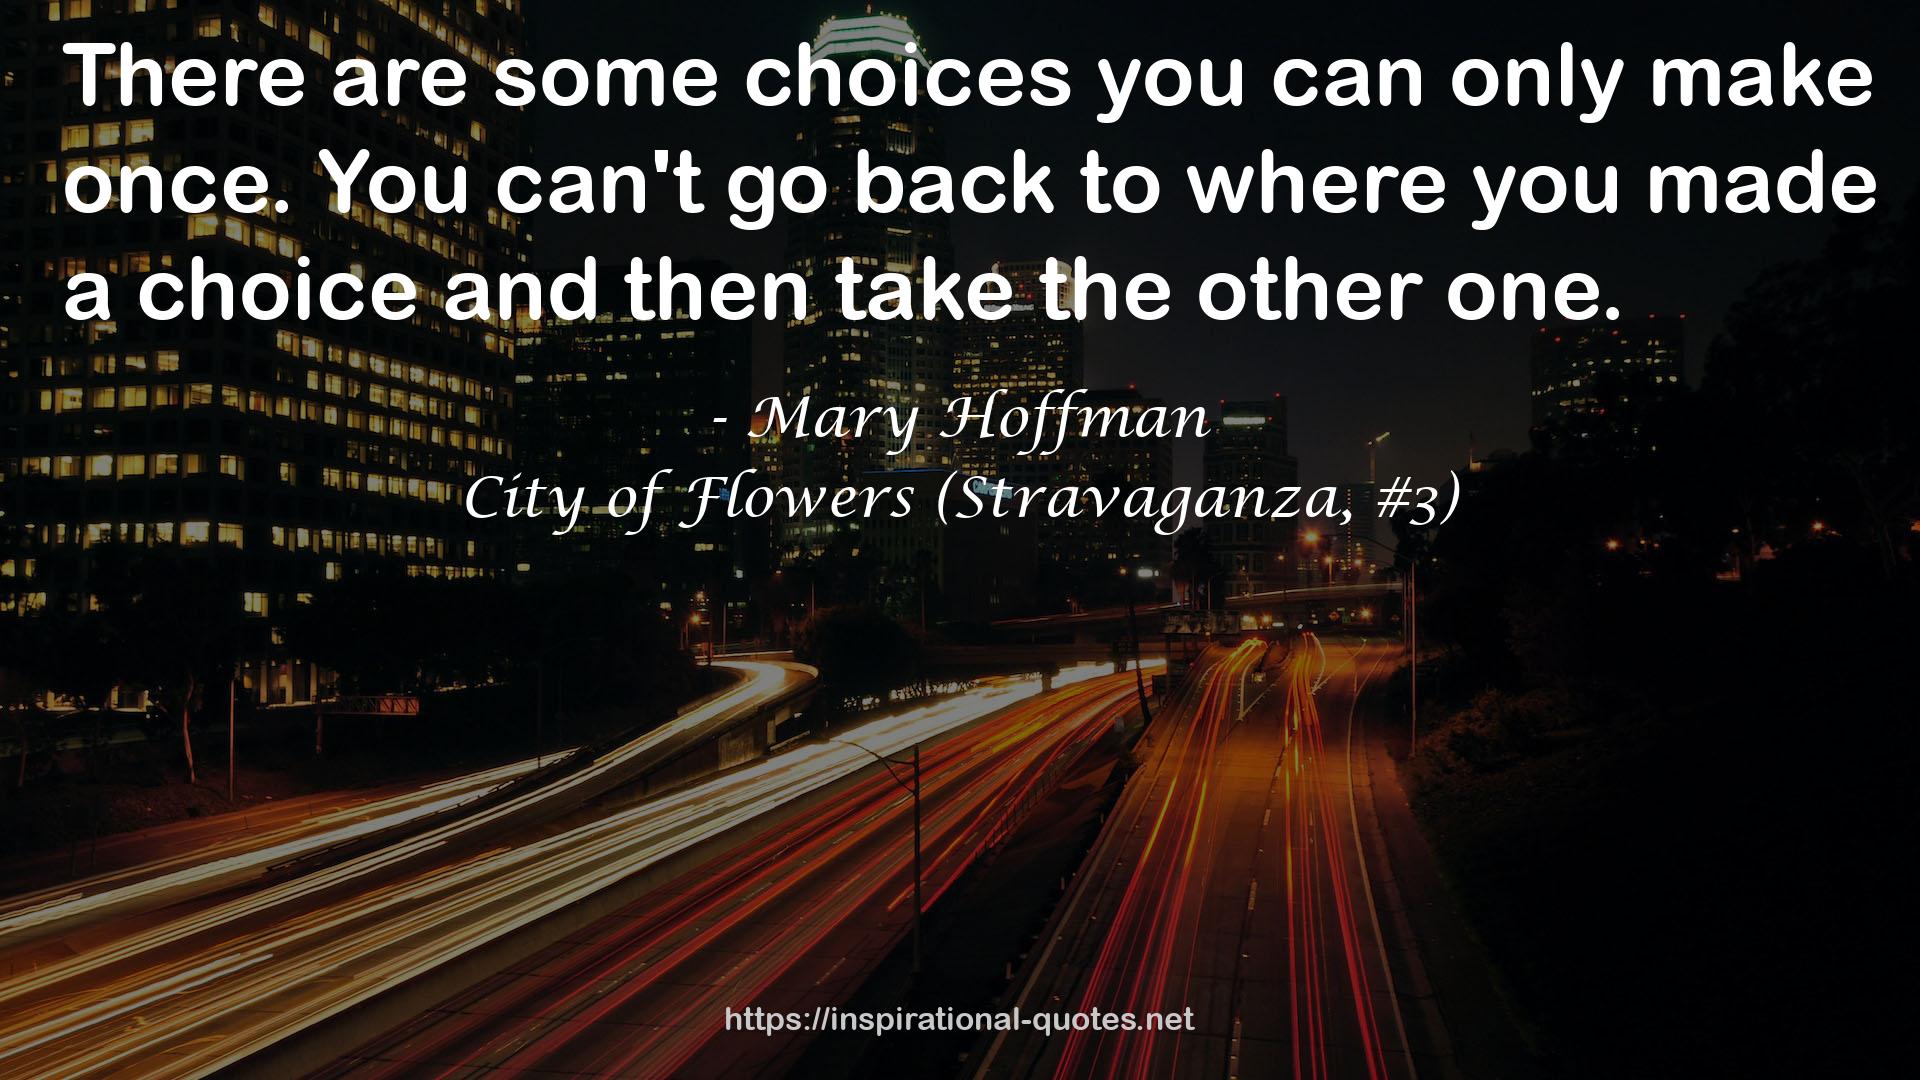 City of Flowers (Stravaganza, #3) QUOTES